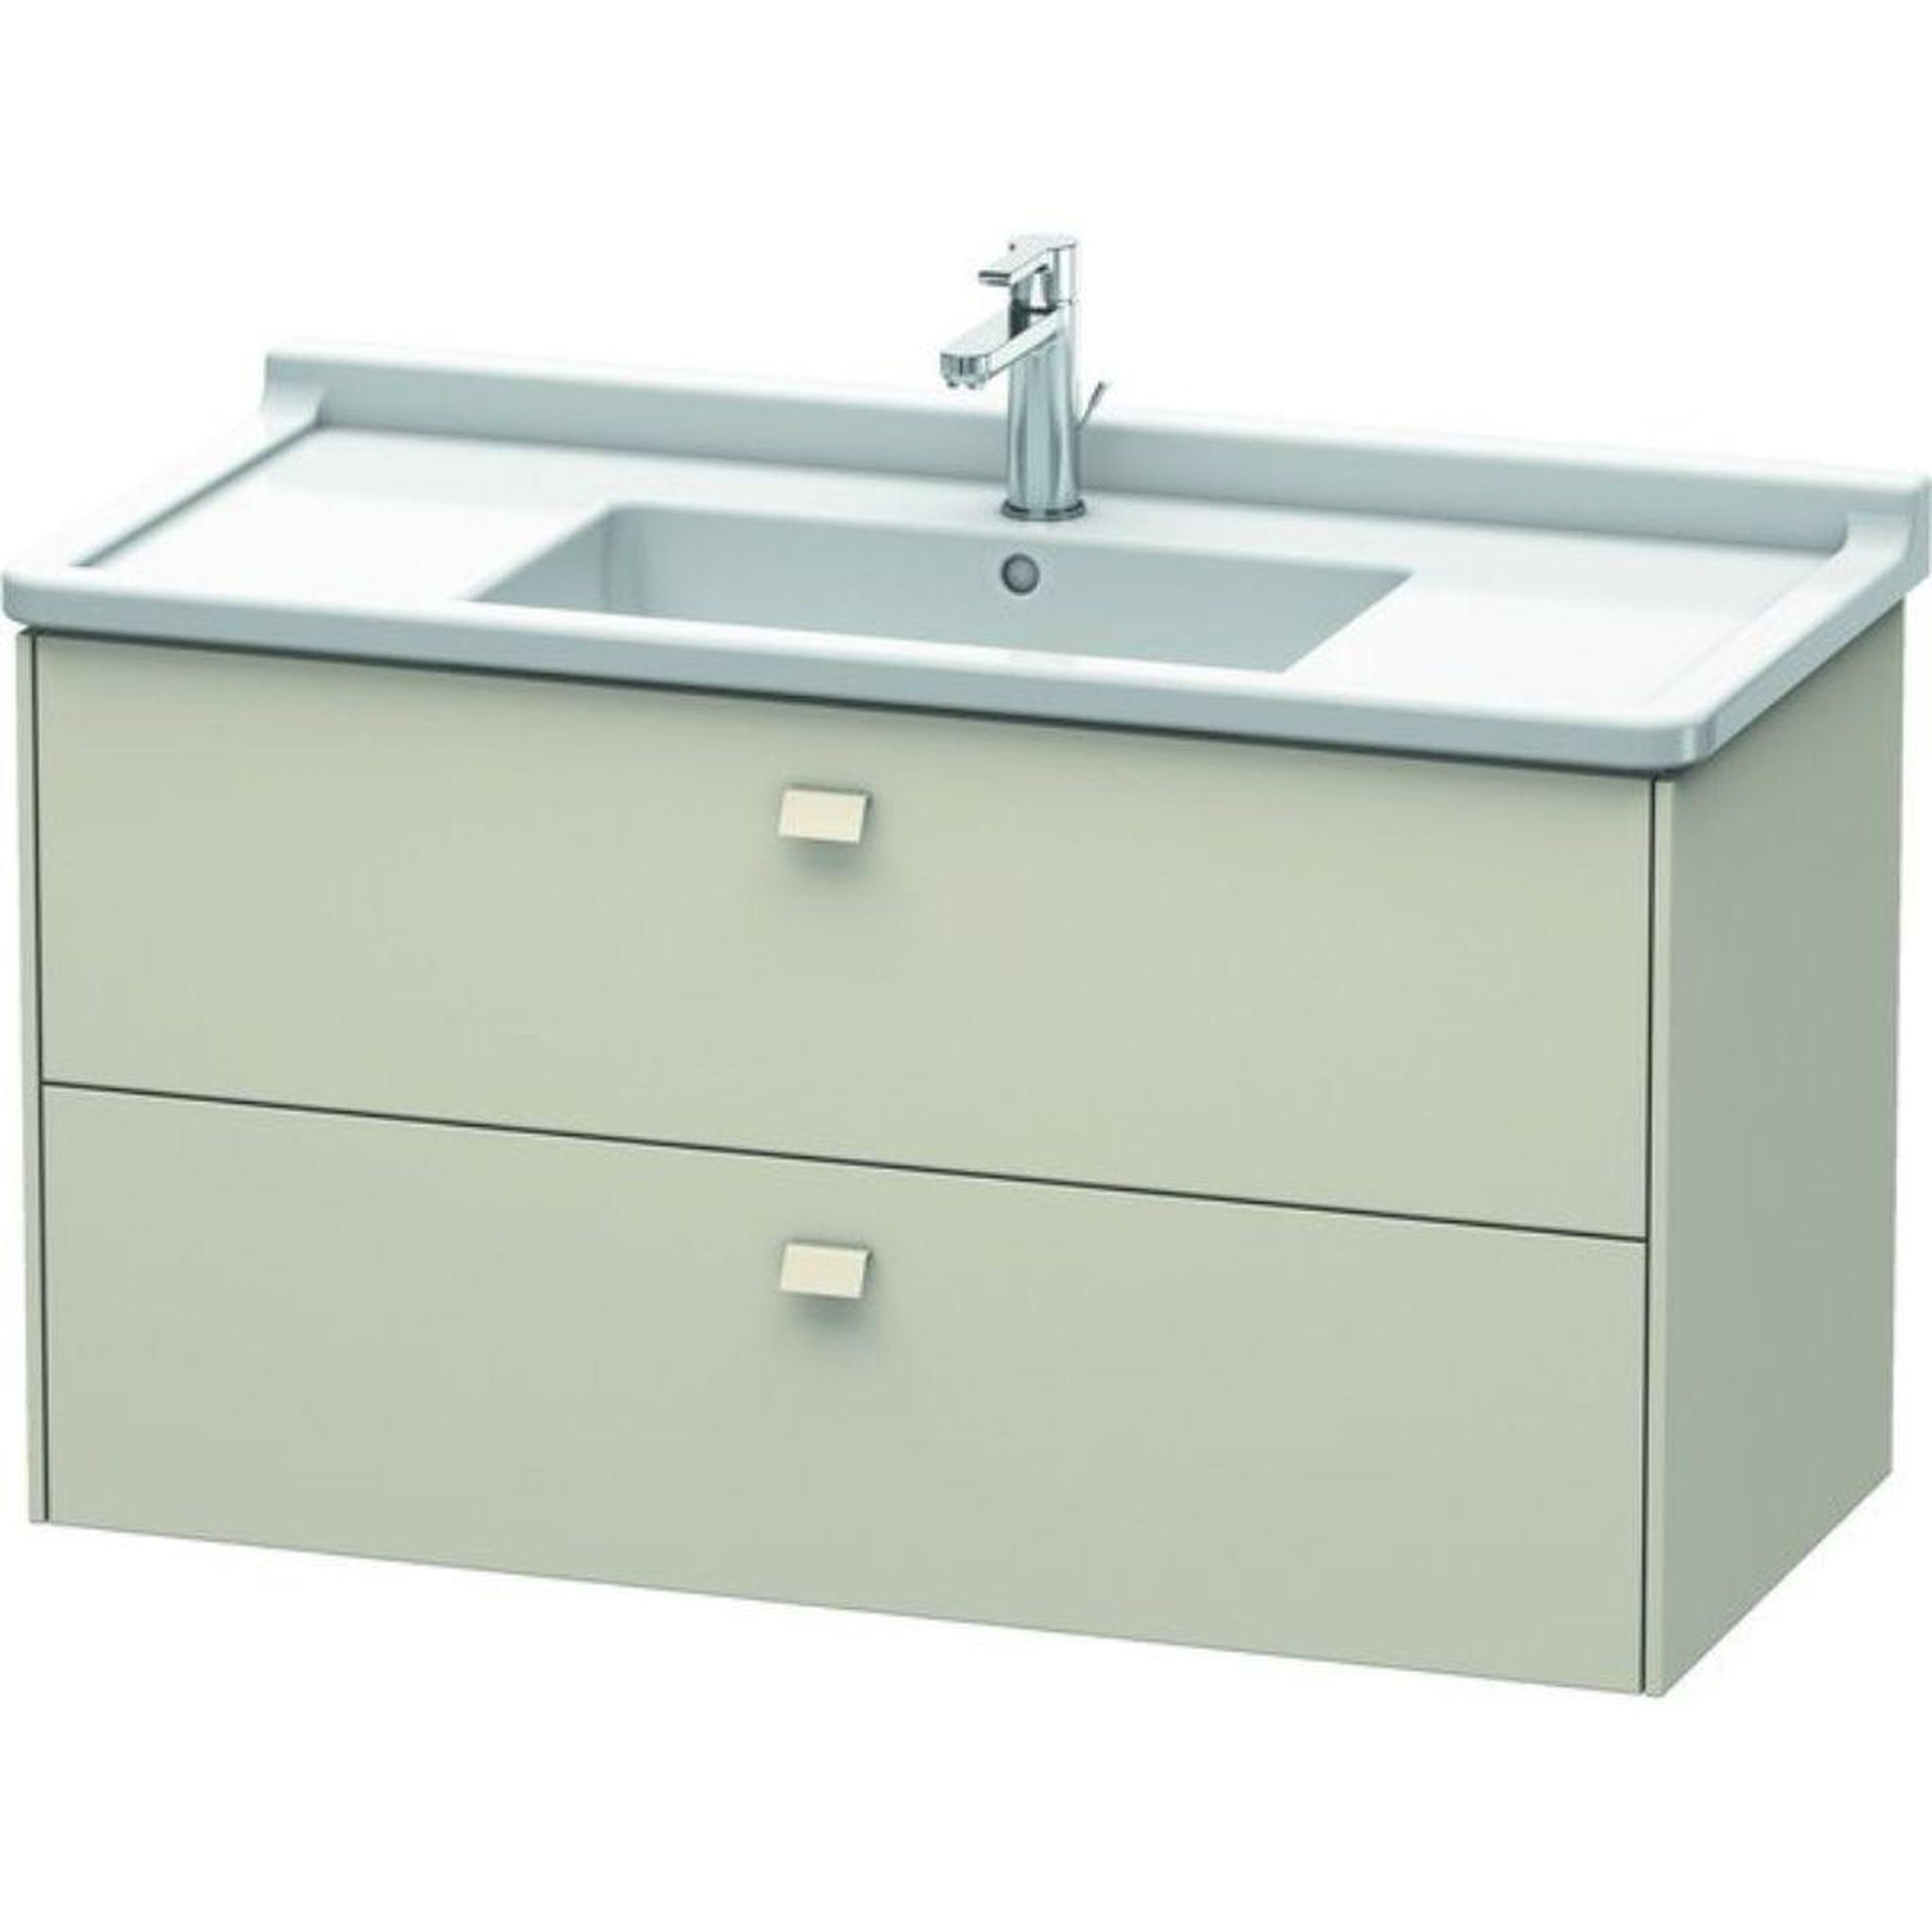 Duravit Brioso BR41430 40" x 22" x 18" Two Drawer Wall-Mount Vanity Unit in Taupe